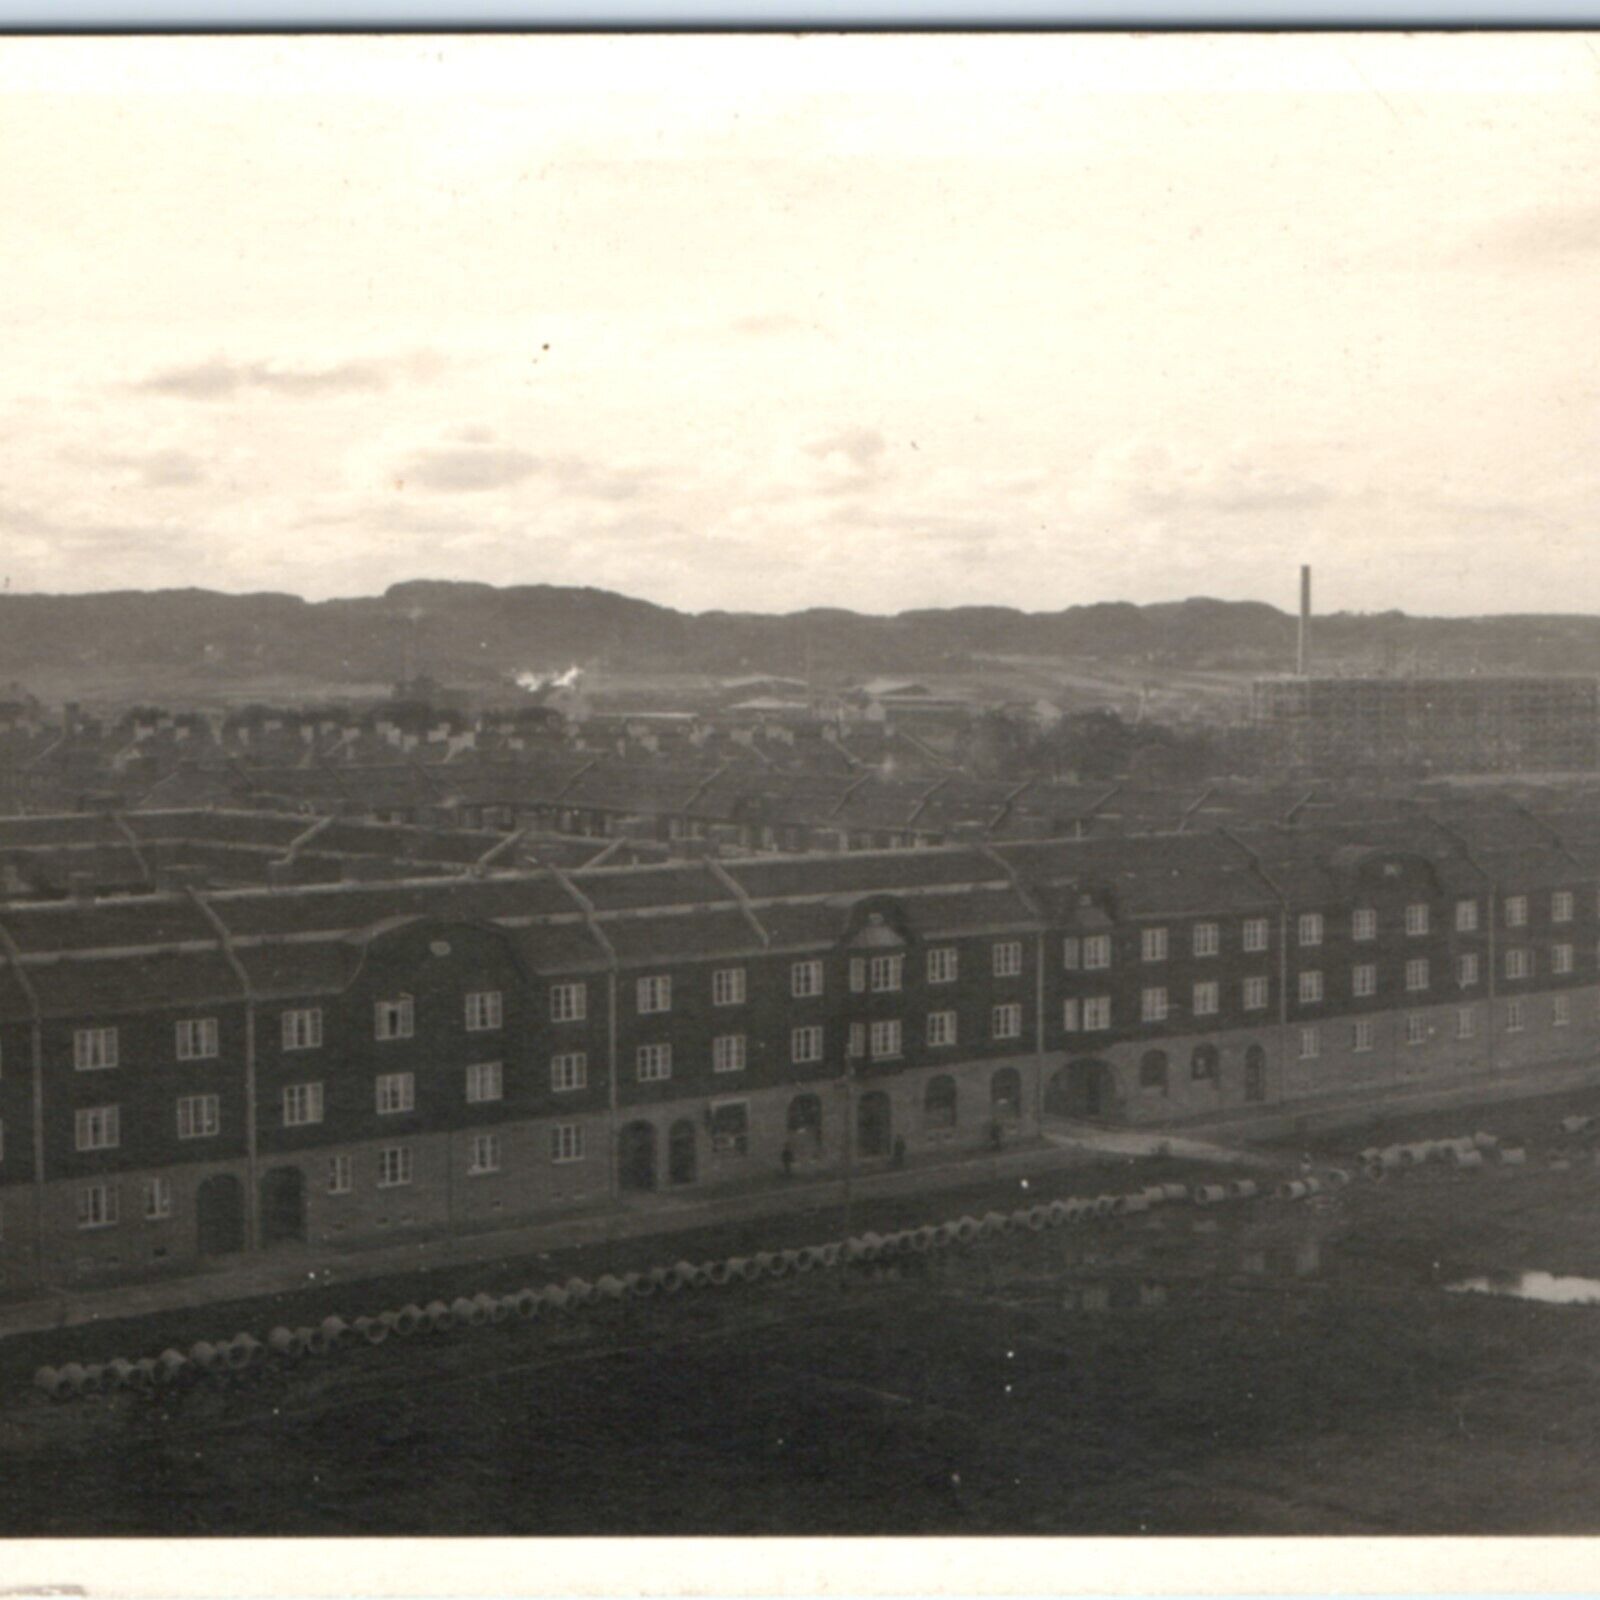 c1910s Huge Unknown Residence Building RPPC Asylum? Real Photo Postcard A134